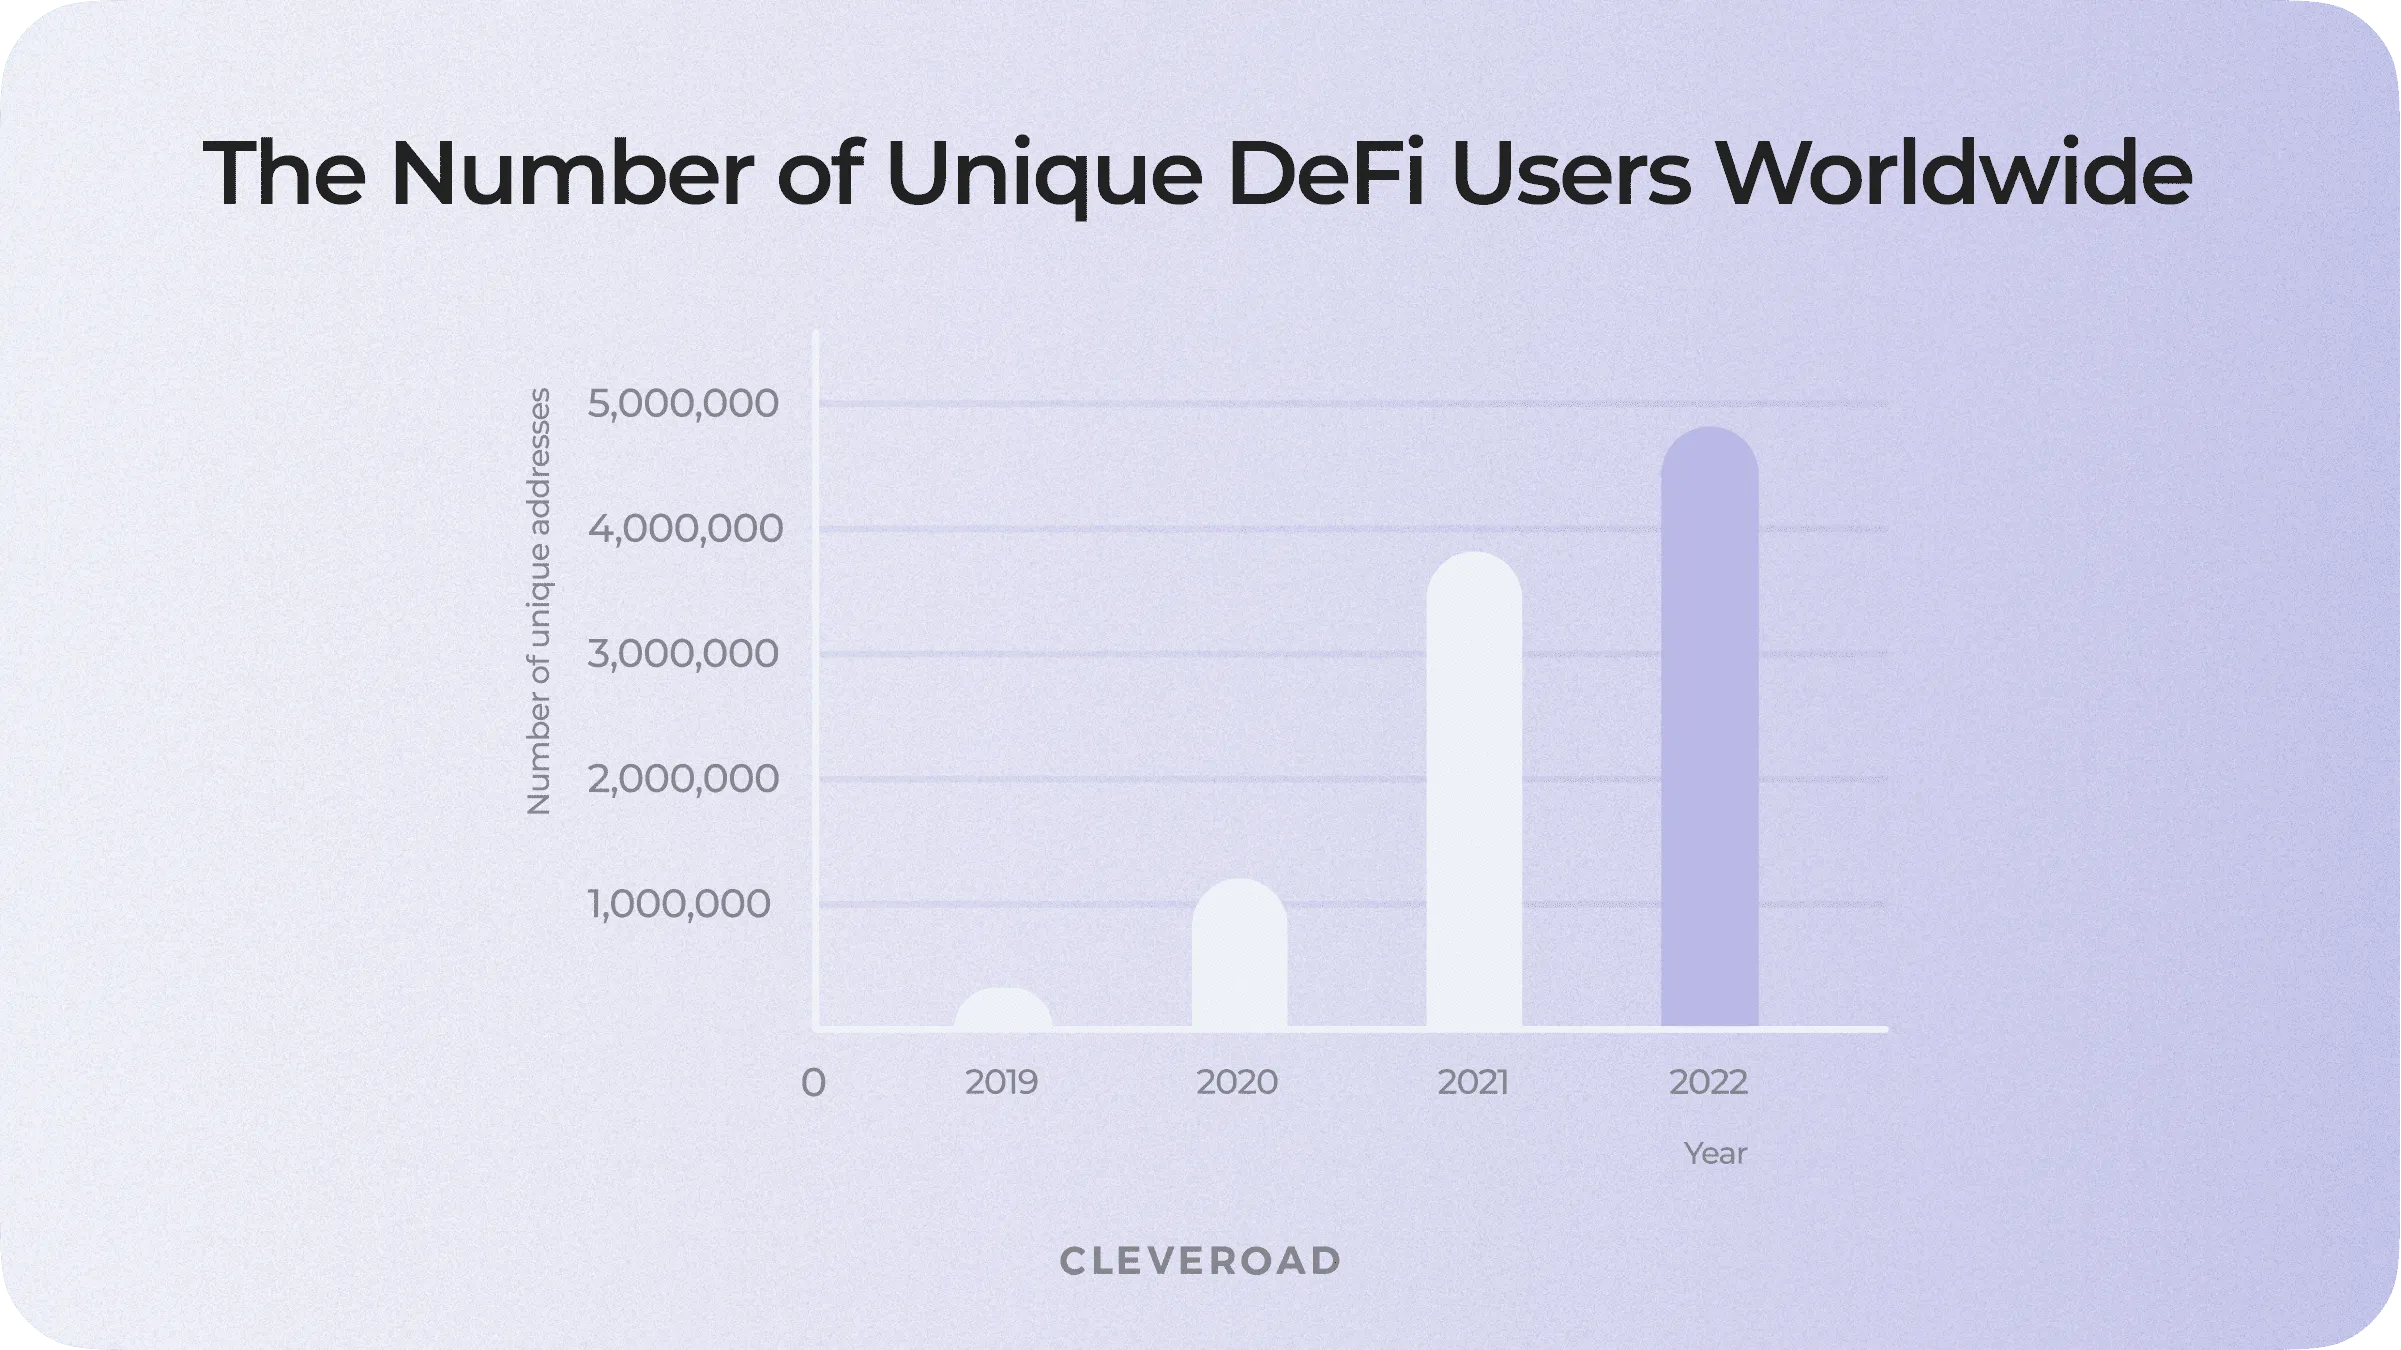 The number of unique DeFi users worldwide, 2019-2022